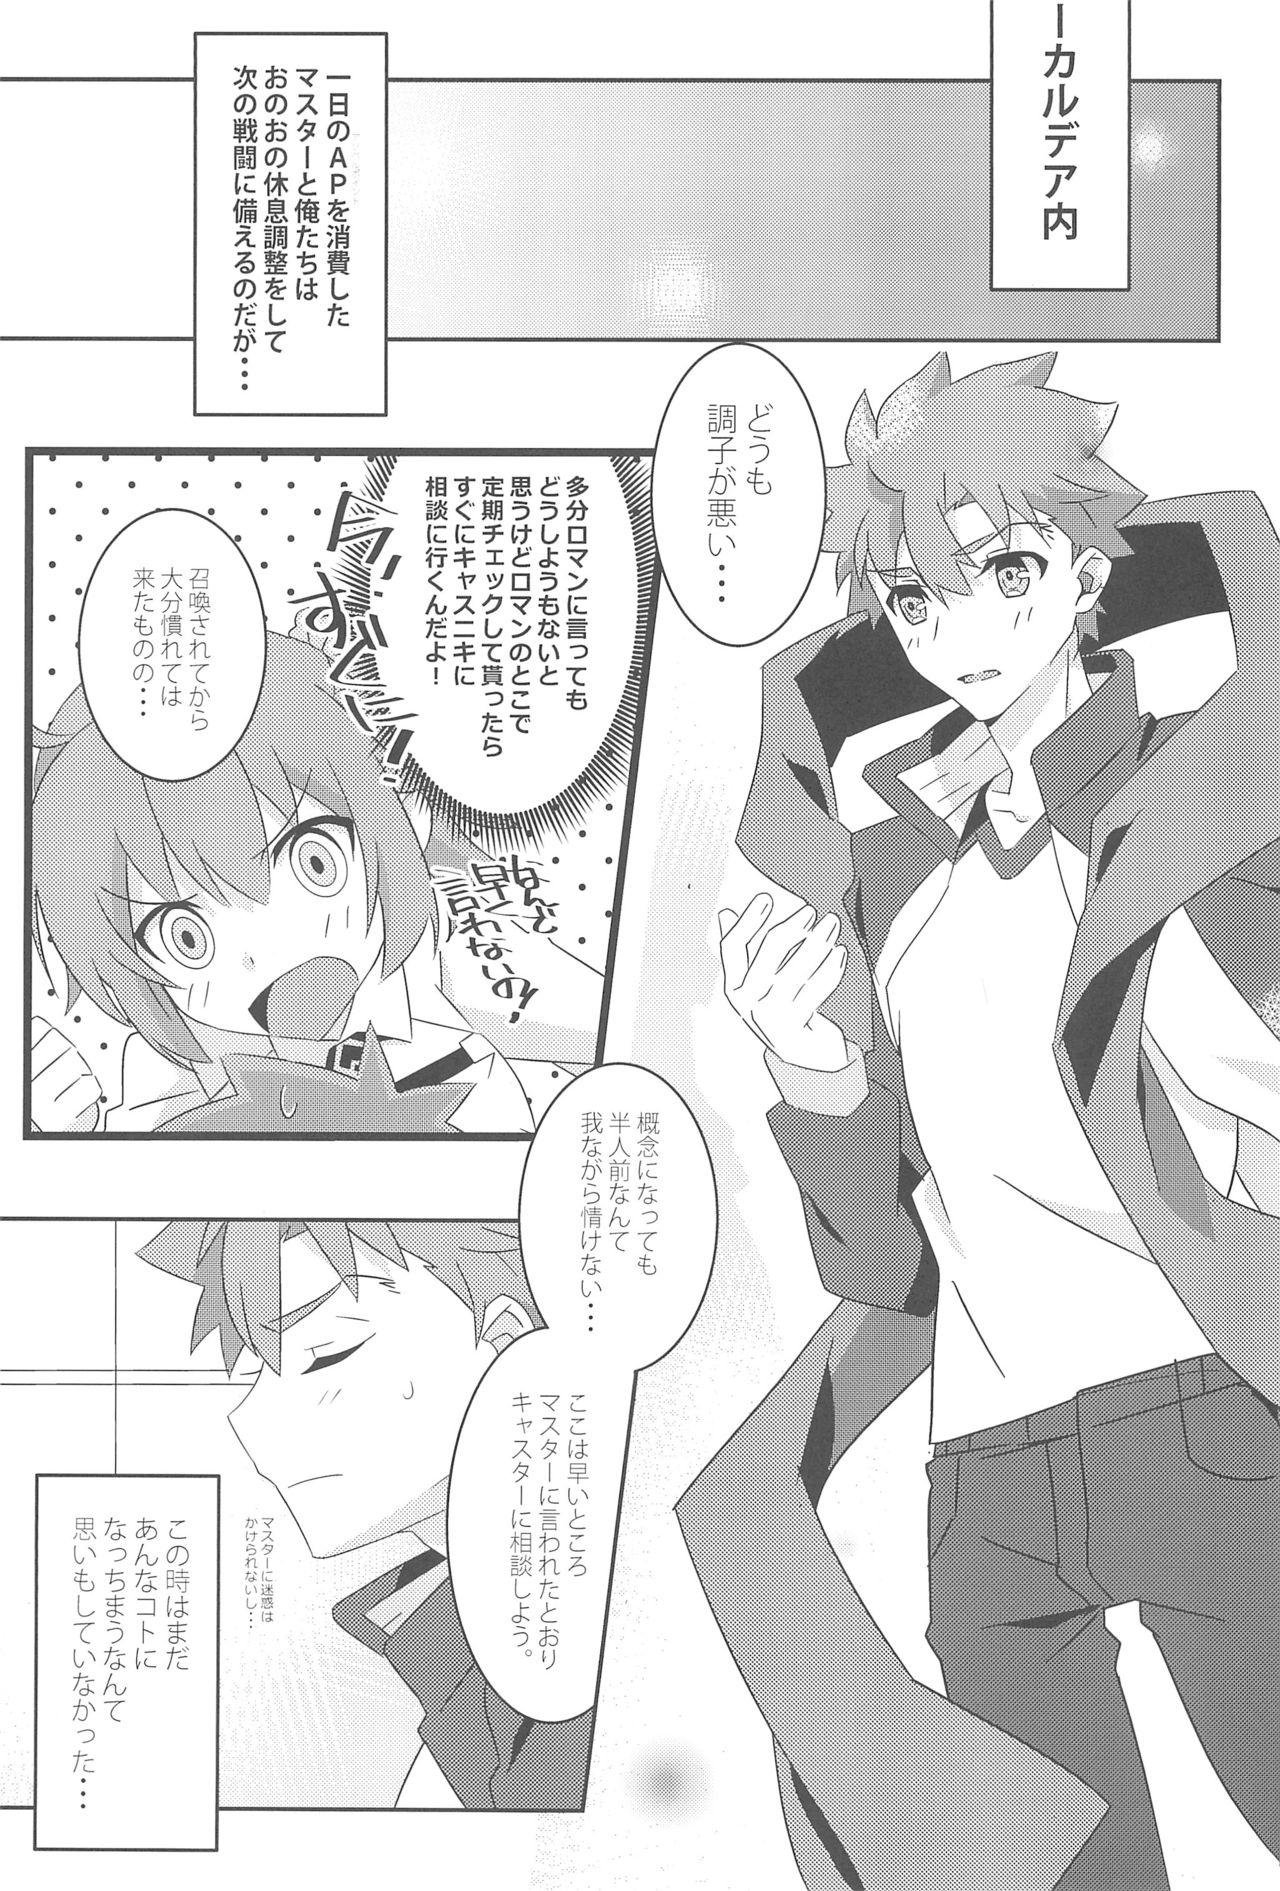 Tranny COME TO ME - Fate stay night Indoor - Page 5